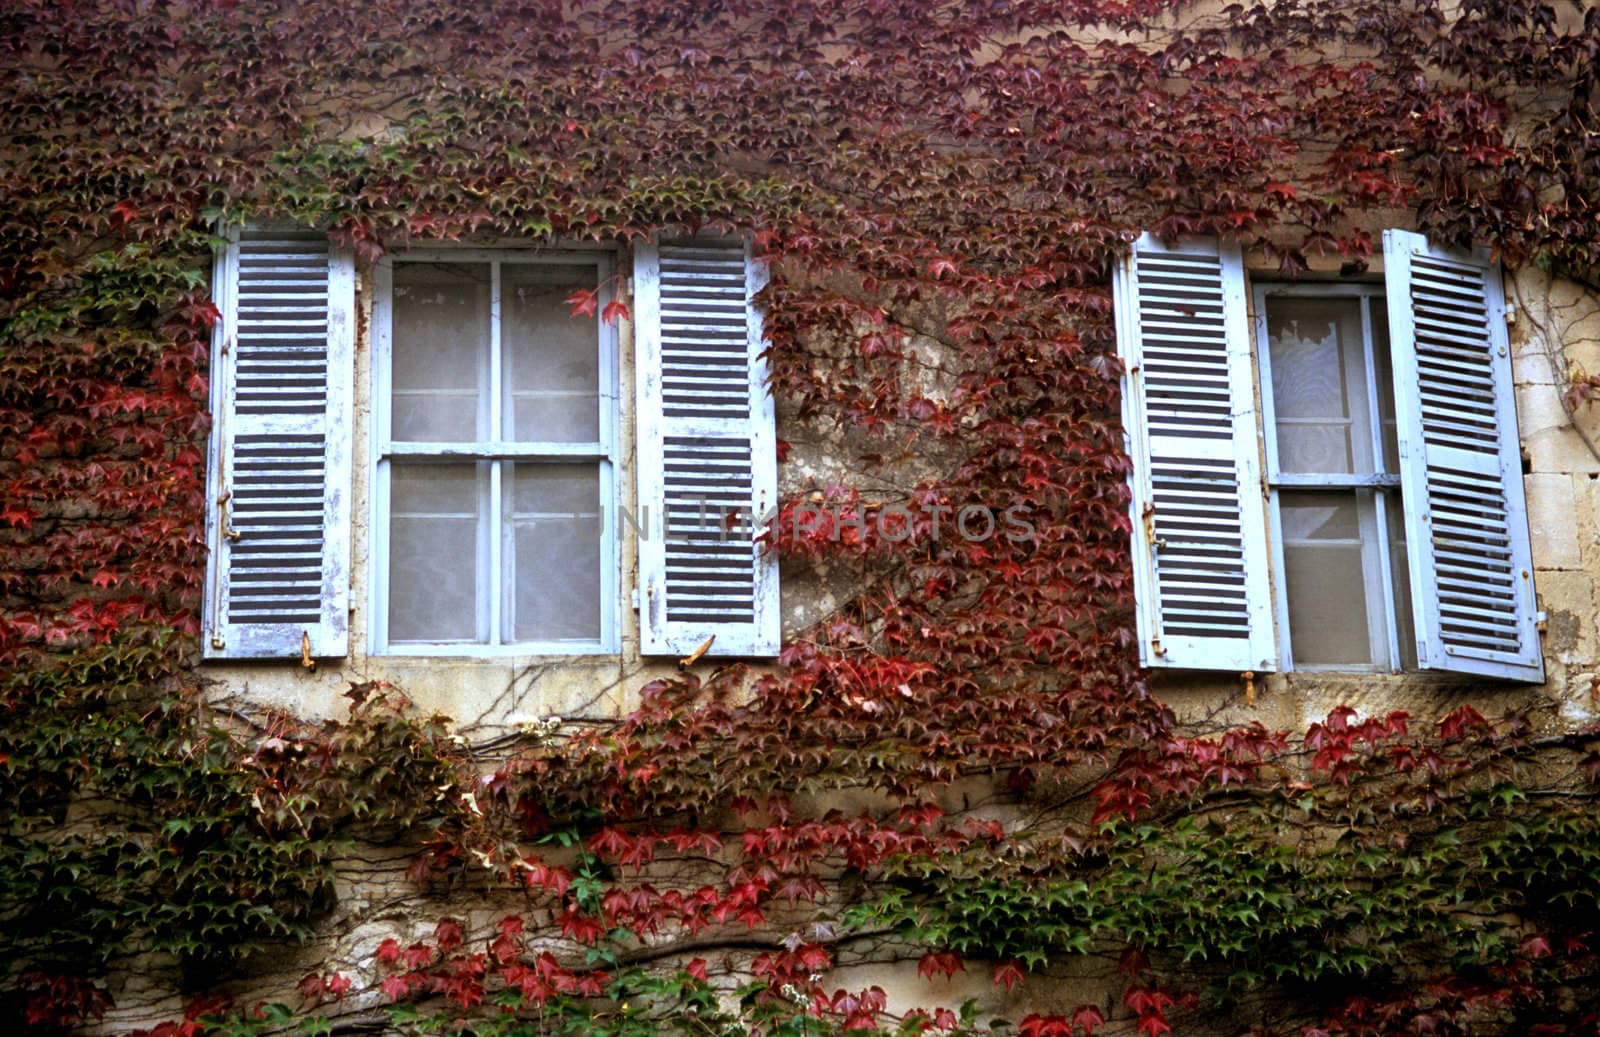 Windows with shutters painted the traditional Provencial blue are surrounded by vines whoes leaves are turning red in autumn.